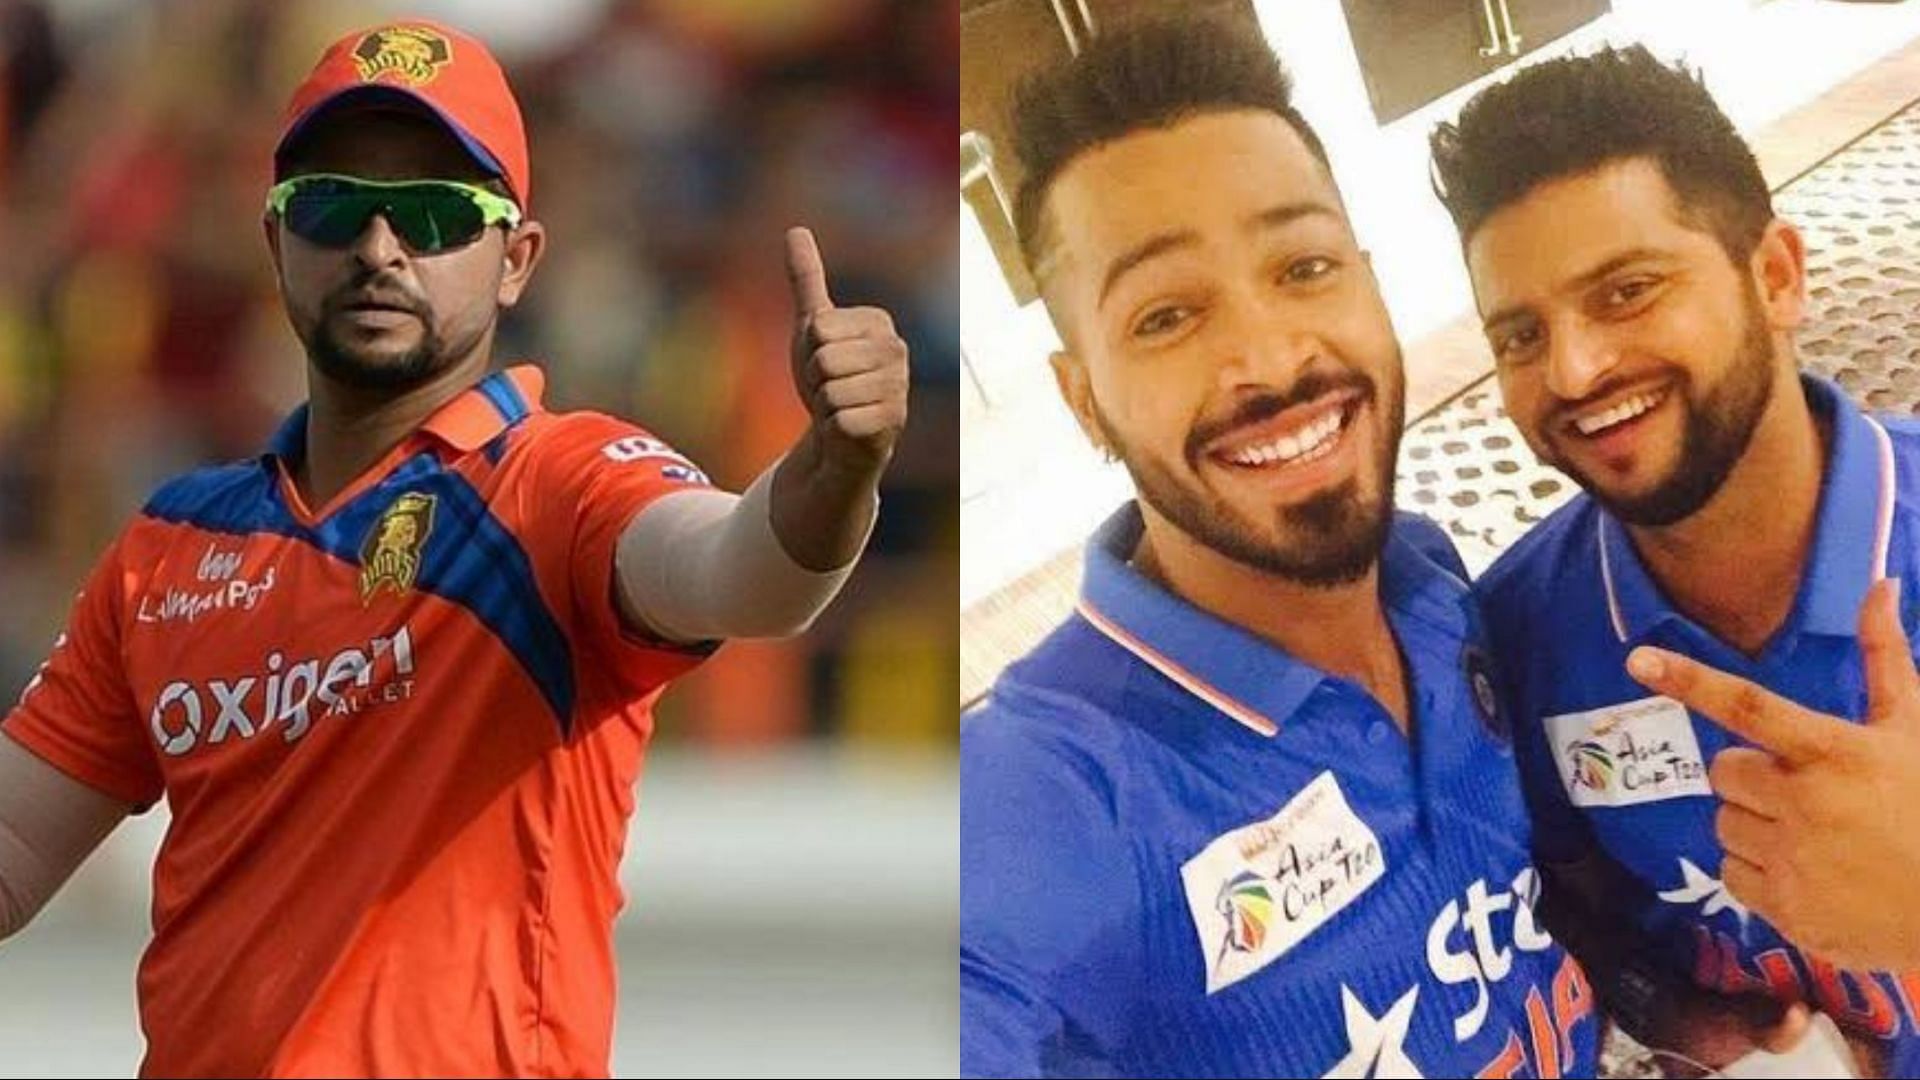 Suresh Raina was the captain of Gujarat Lions. Will he unite with Hardik Pandya and play for Ahmedabad?